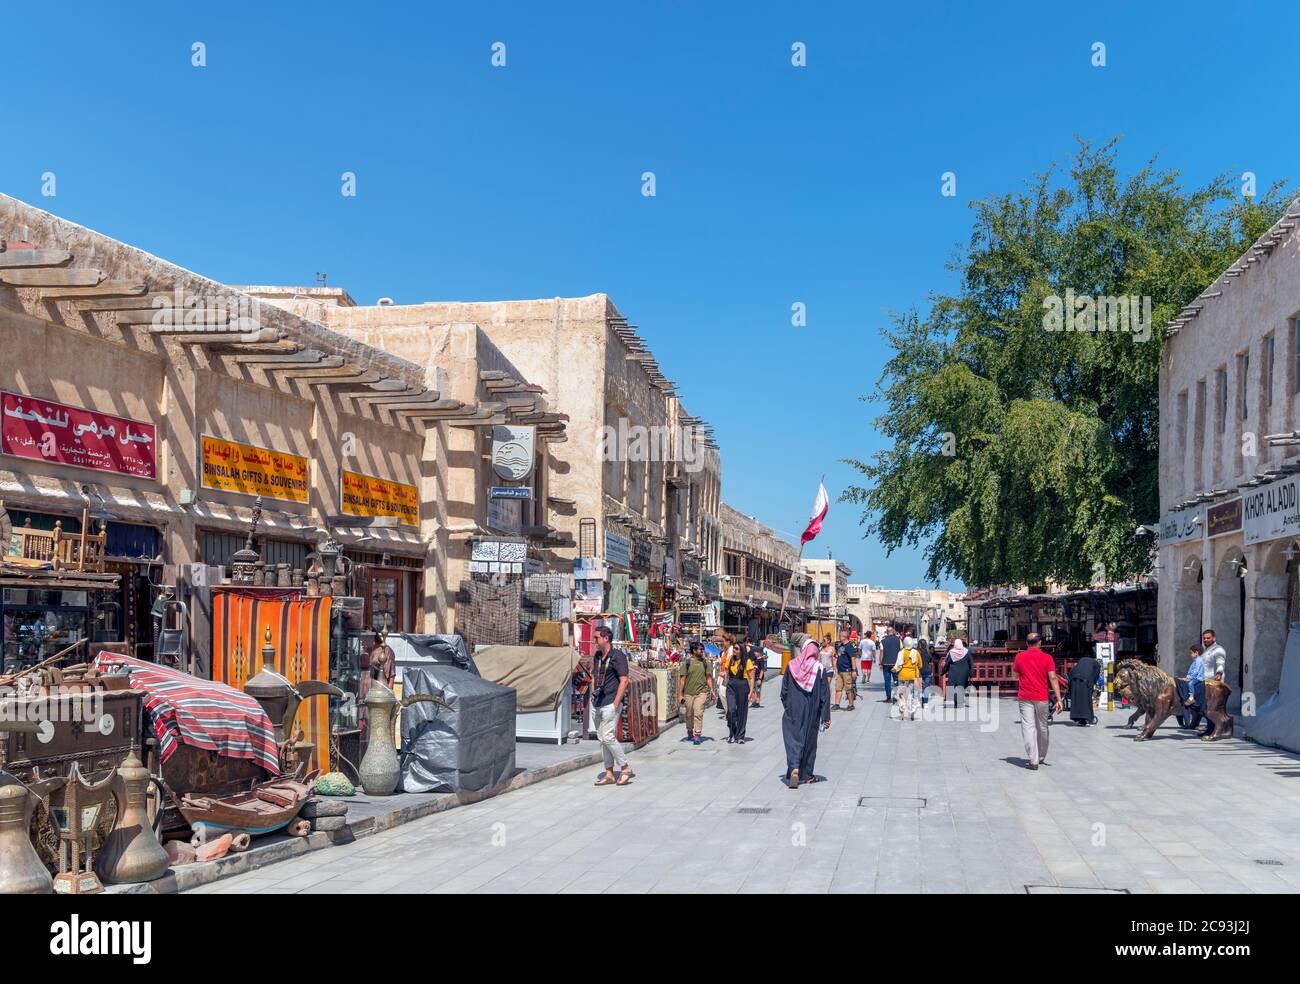 Shops and stores in Souq Waqif, Doha, Qatar, Middle East Stock Photo